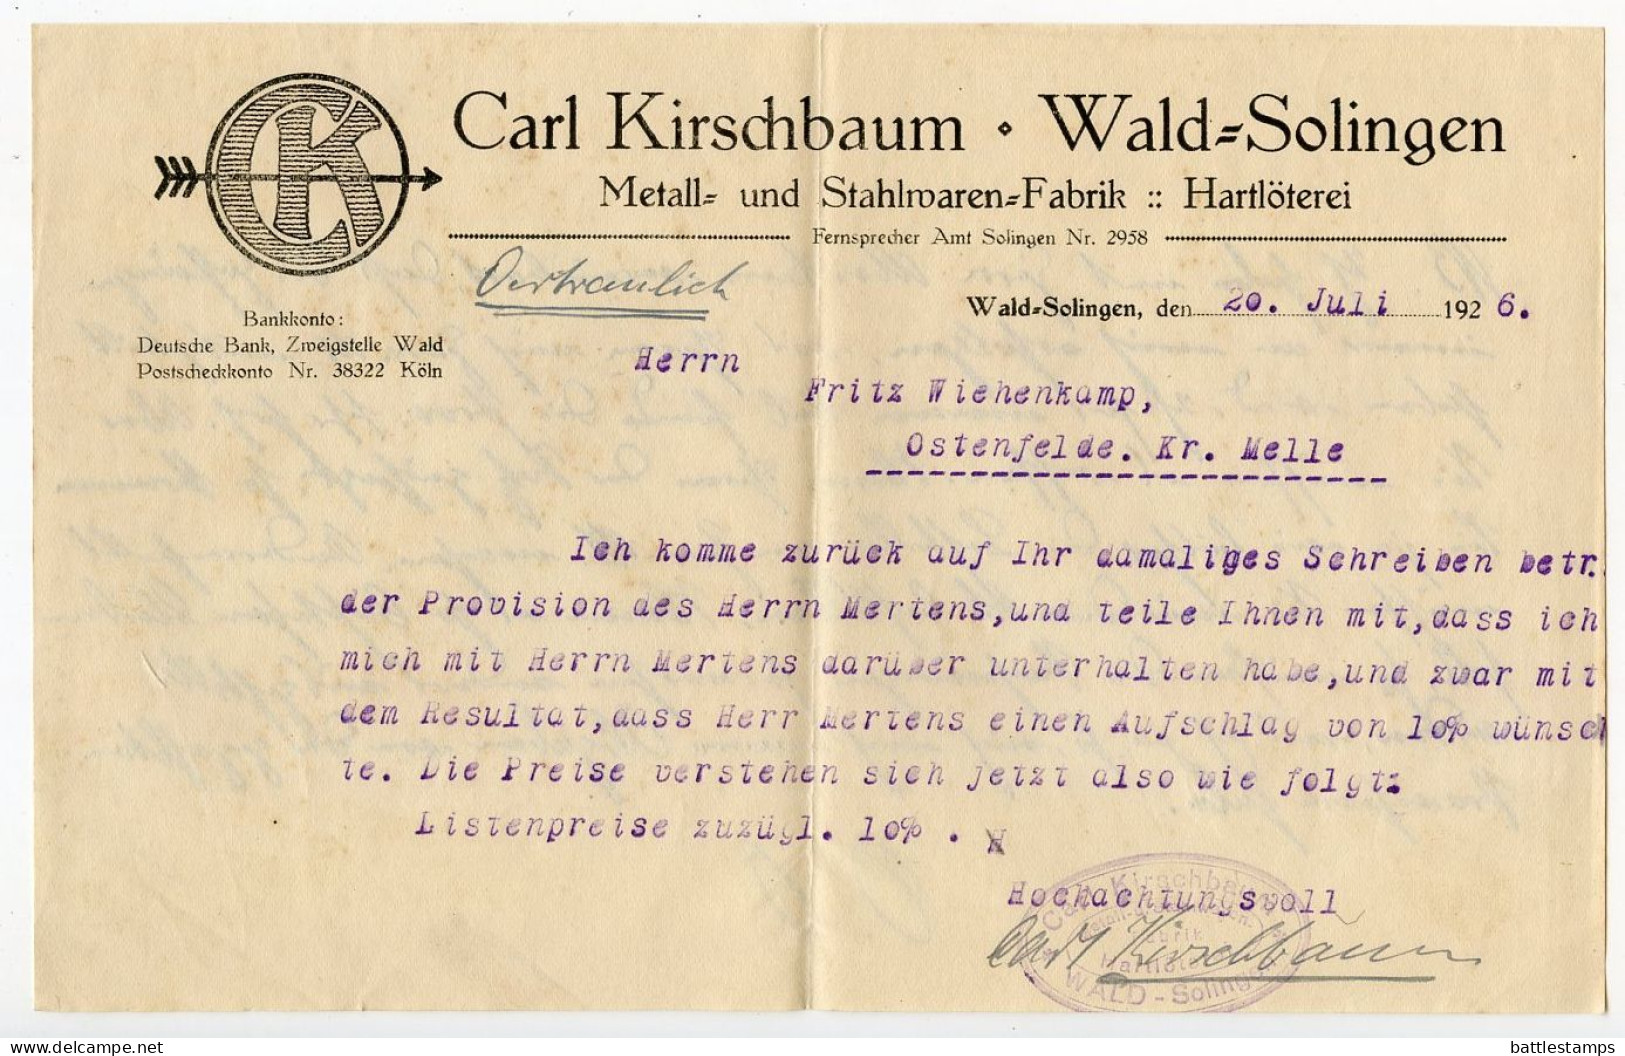 Germany 1926 Cover W/ Letter & Invoice; Weyer - Carl Kirschbaum, Metall- Und Stahlwaren-Fabrik; 5pf. German Eagle X 2 - Covers & Documents